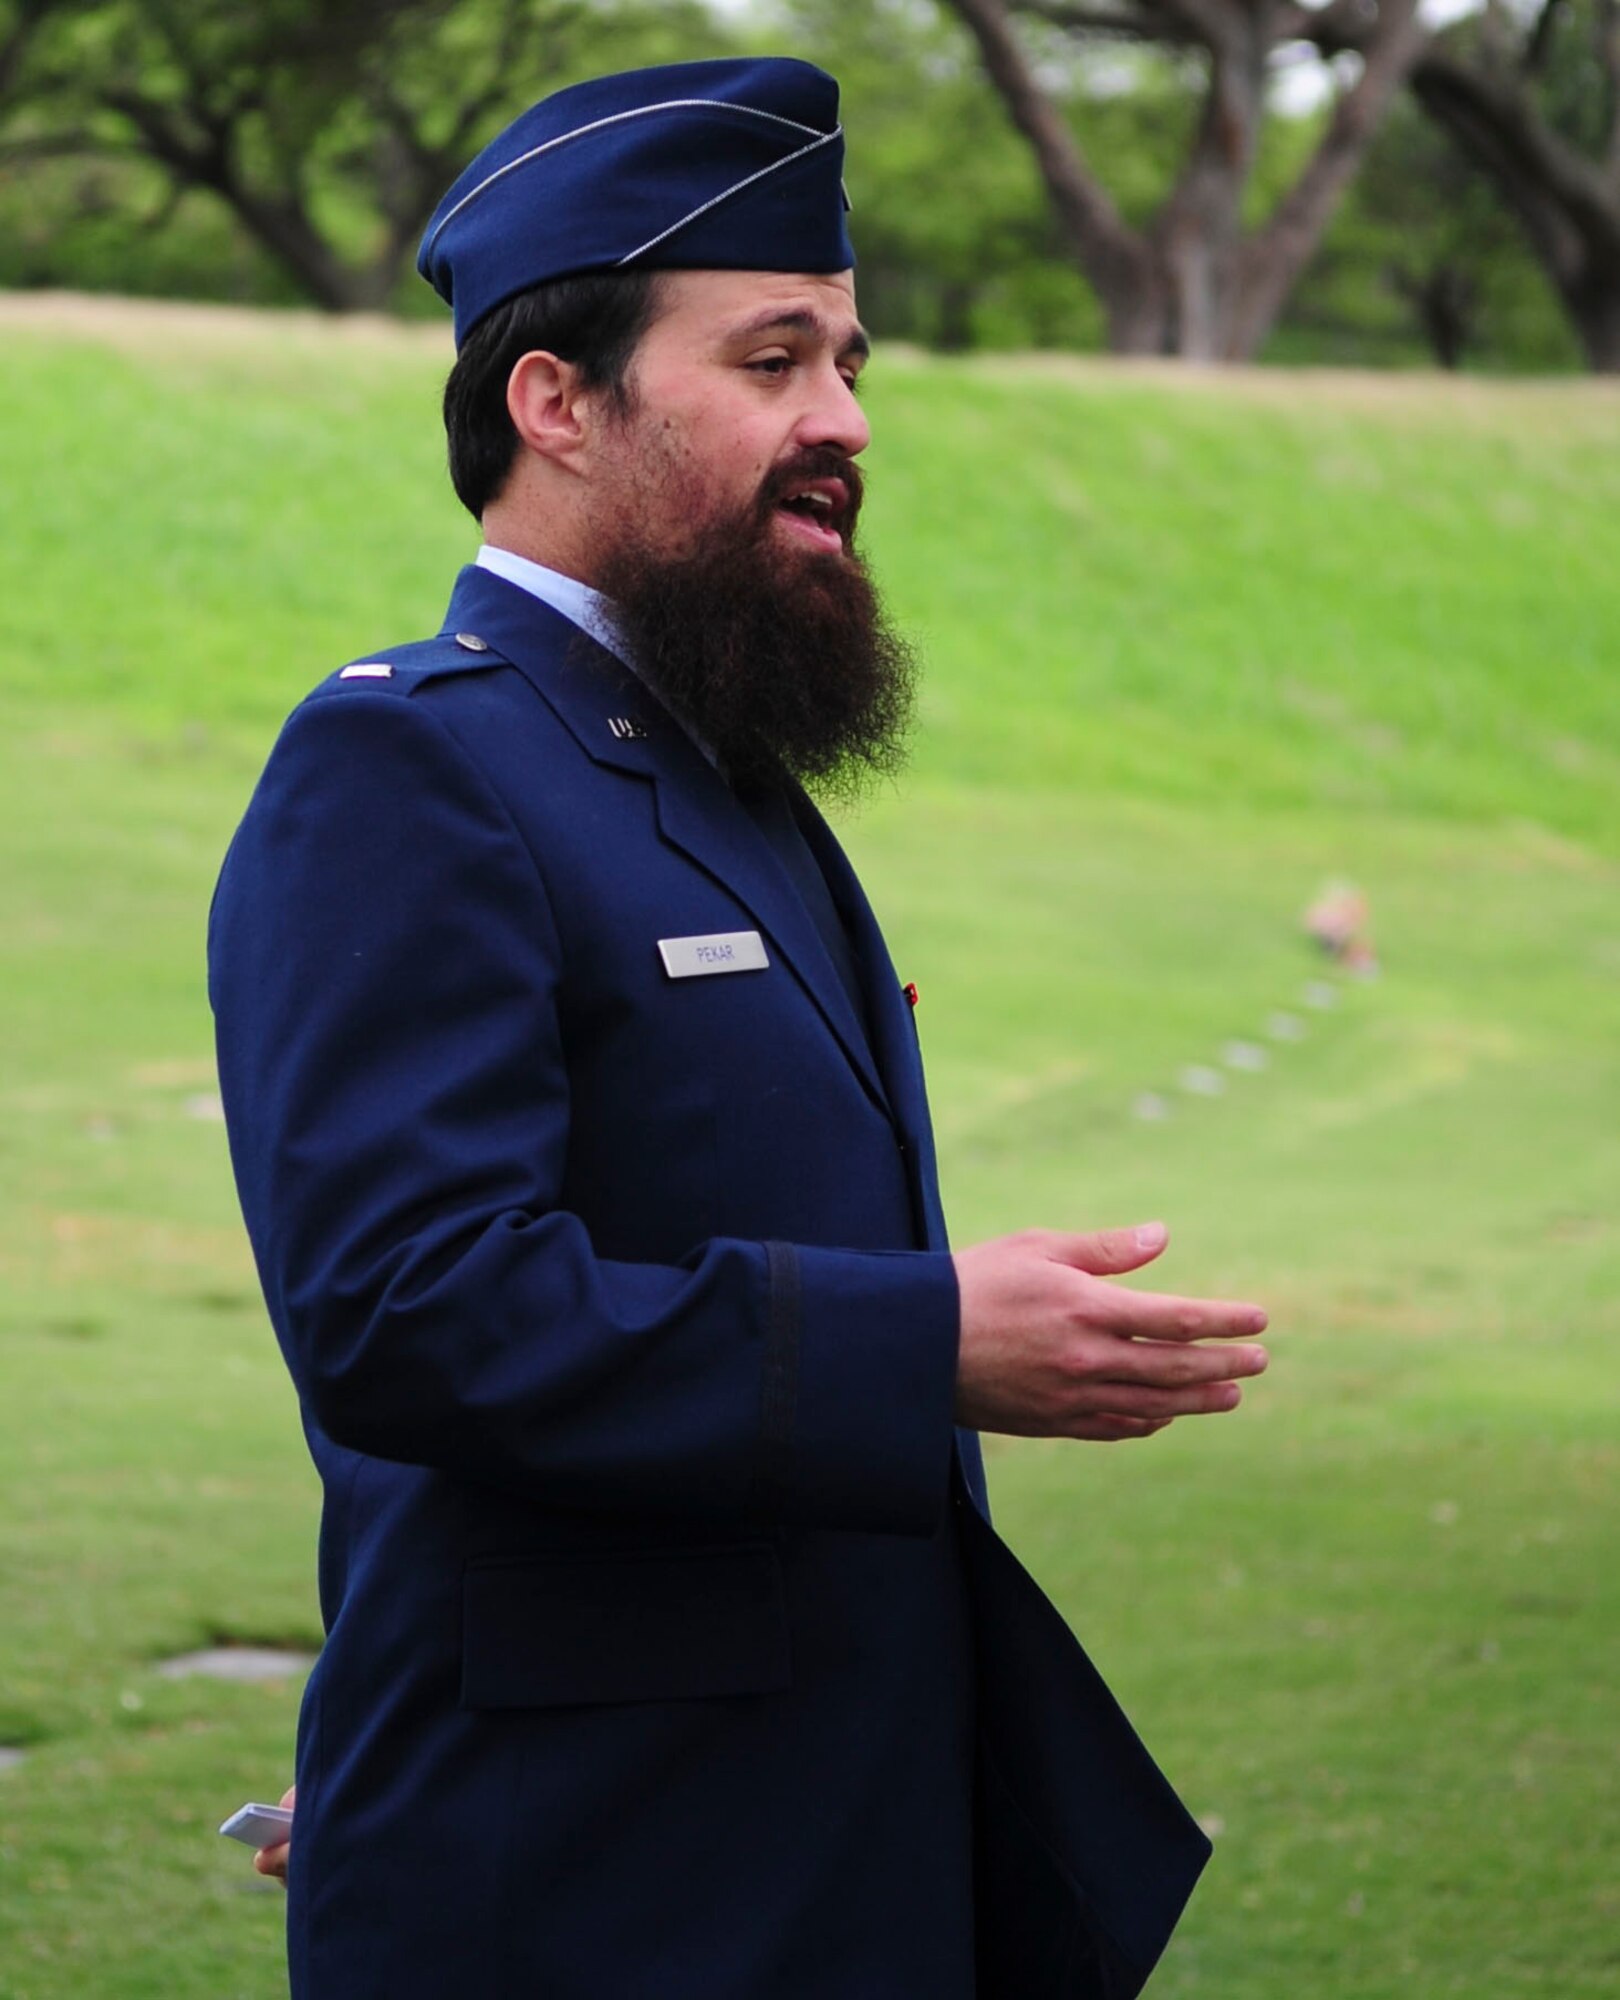 U.S. Air Force 1st Lt. Levy Pekar, Rabbi Chaplain assigned to Nellis Air Force Base, Nev., led the headstone replacement ceremony to honor of Staff Sgt. Jack Weiner, U.S. Army Air Forces, at the National Memorial Cemetery of the Pacific, Honolulu, HI., Feb. 28, 2017. (U.S. Air Force photo by Tech. Sgt. Heather Redman) 